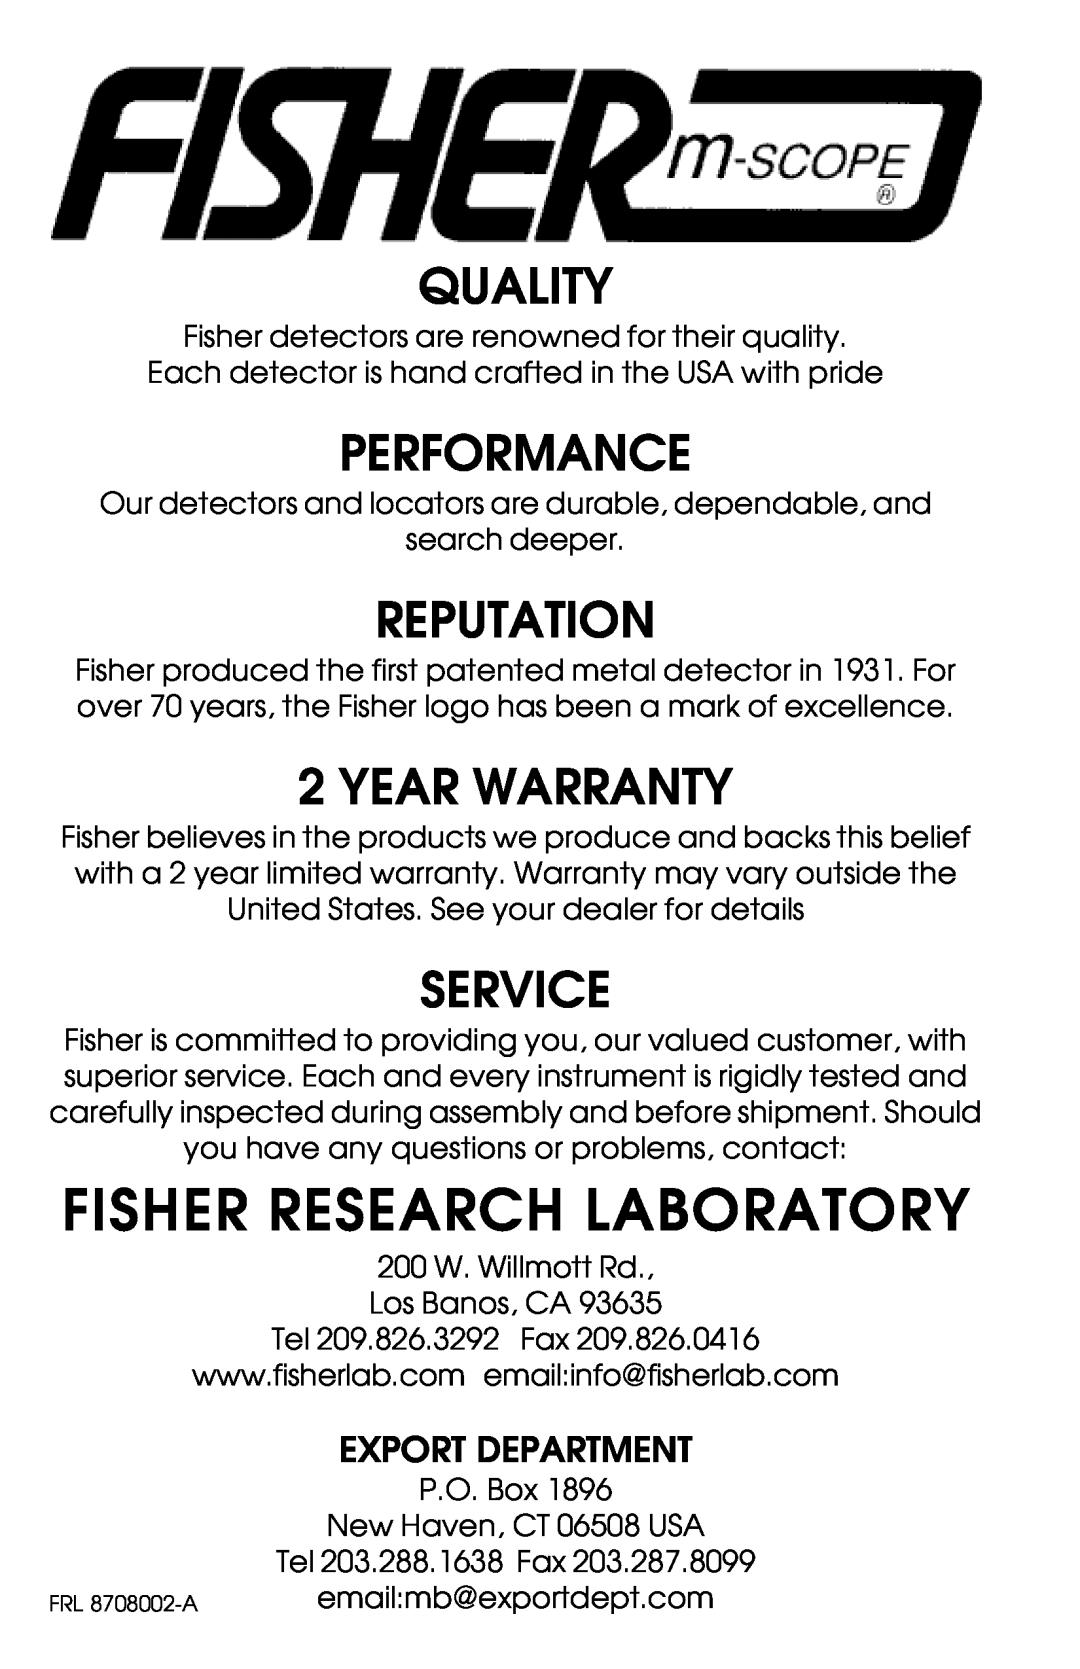 Fisher TW-7700 Fisher Research Laboratory, Quality, Performance, Reputation, Year Warranty, Service, Export Department 